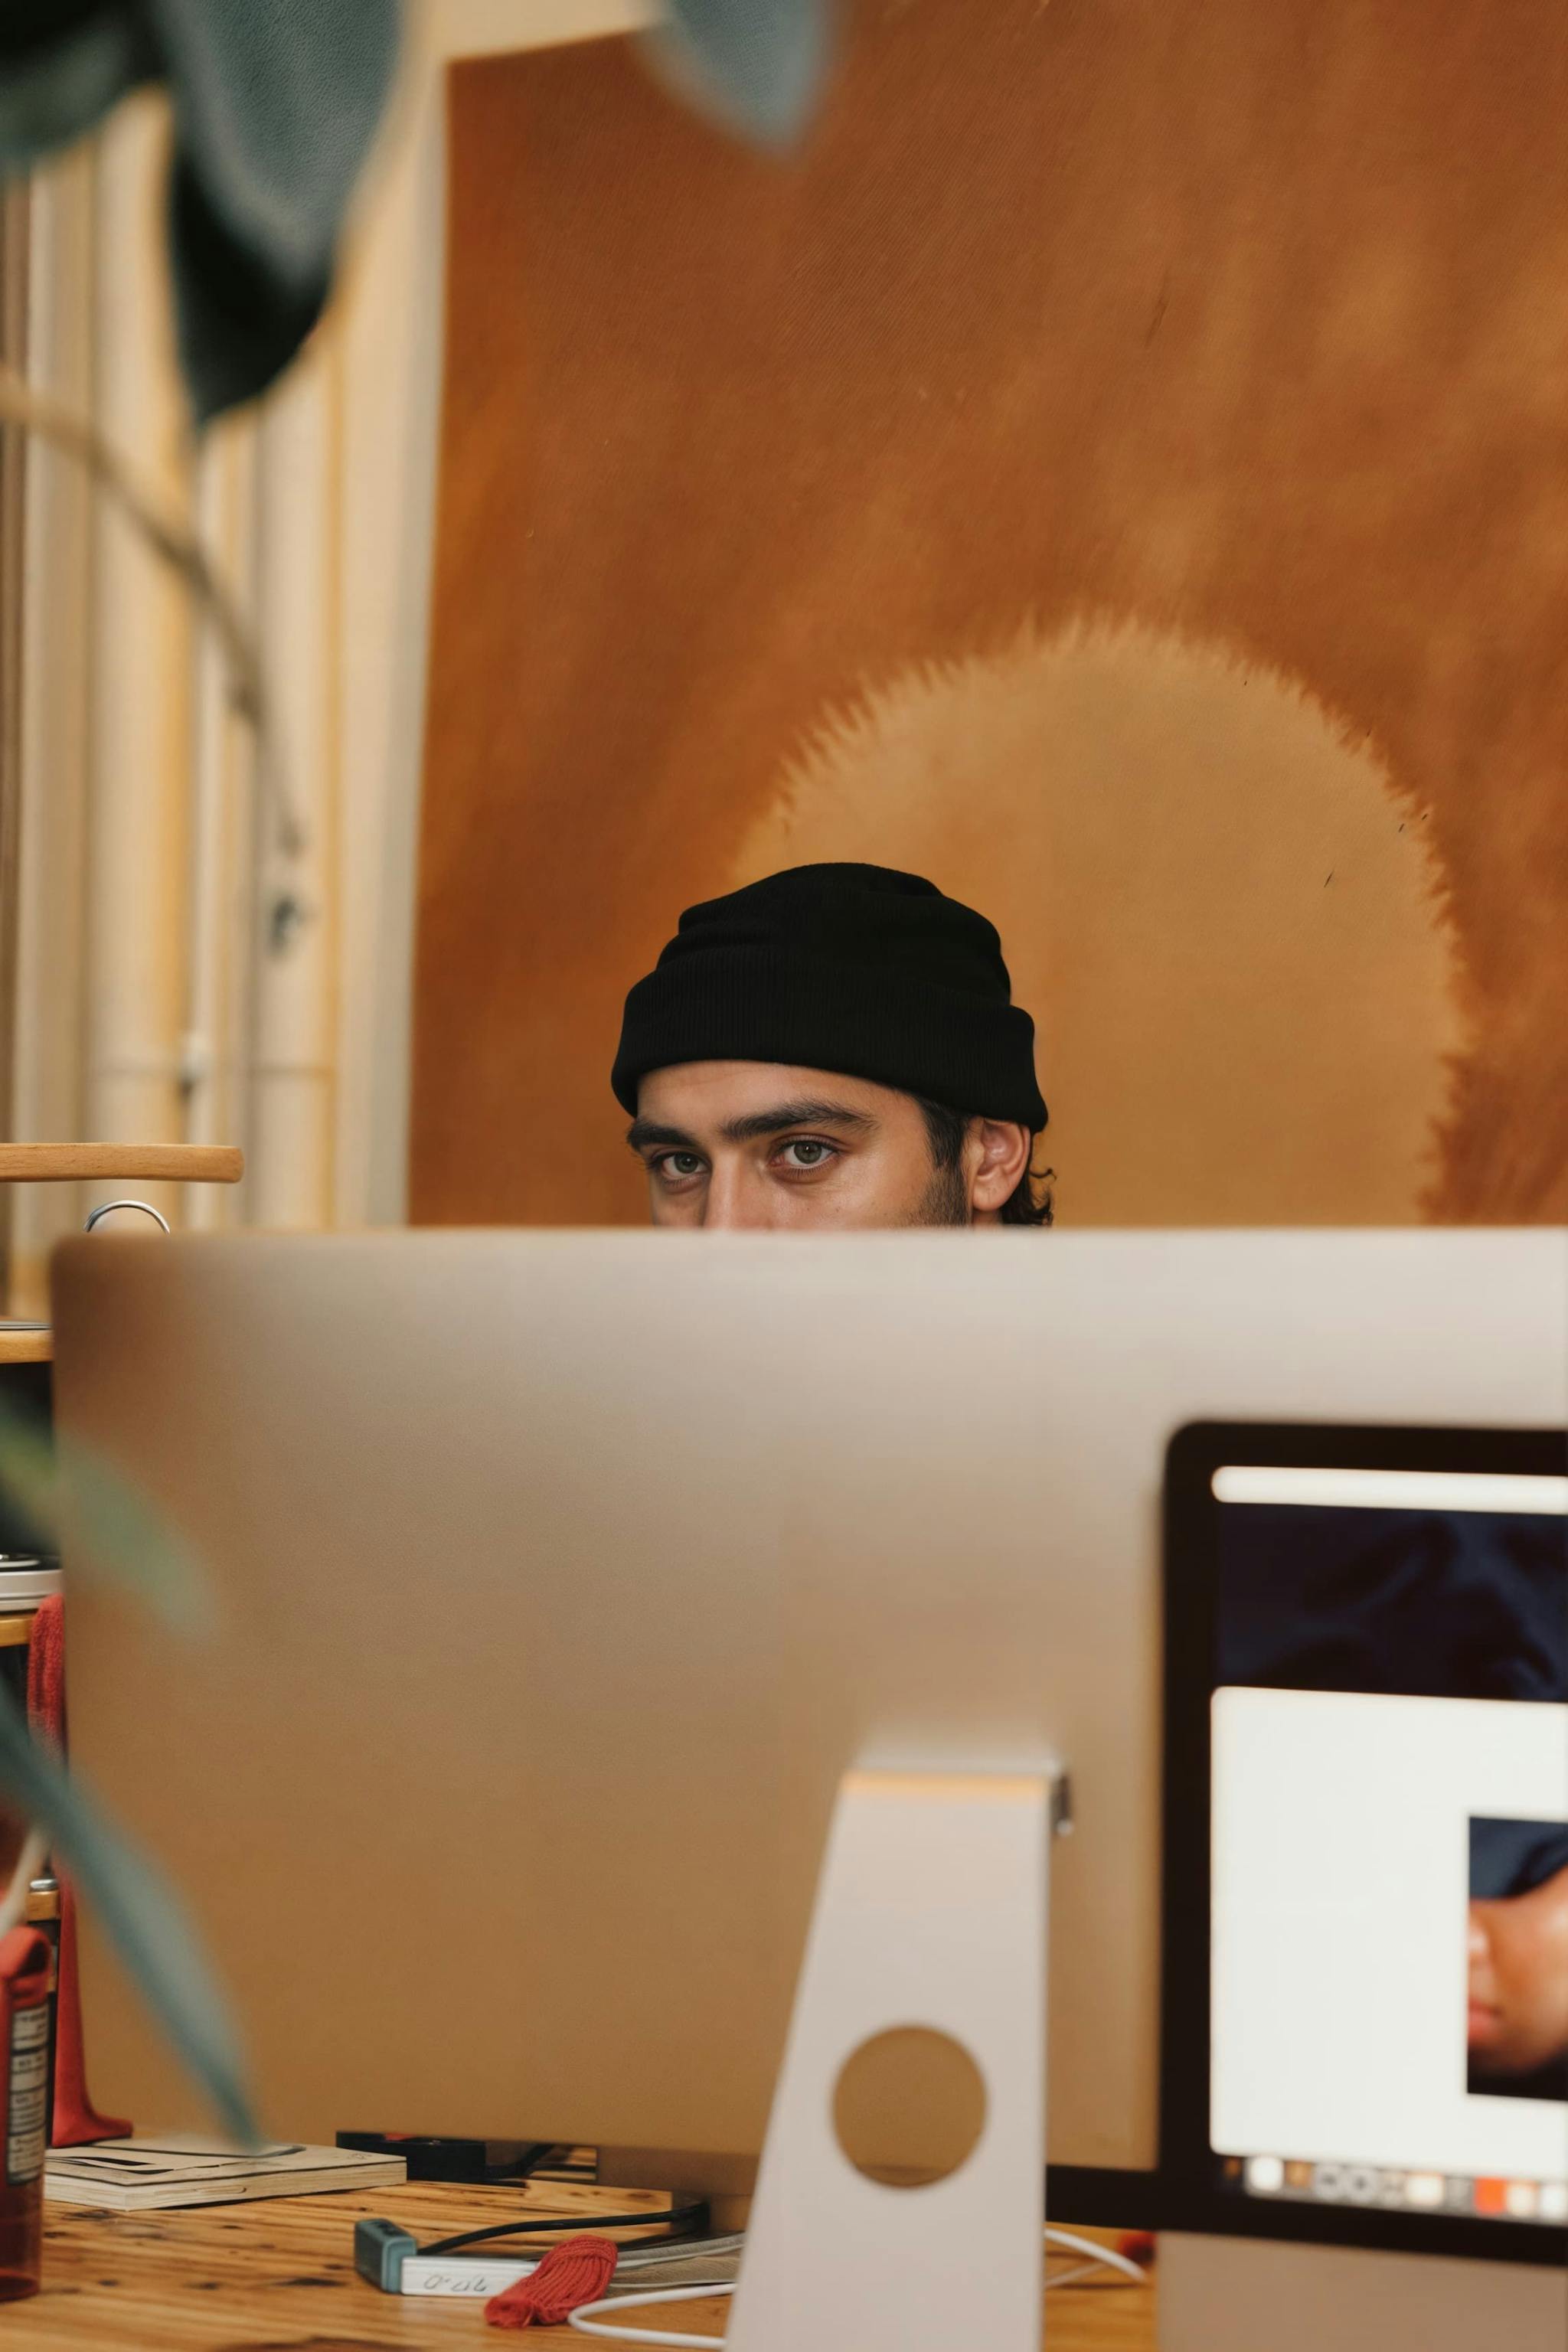 A man is peering over a computer